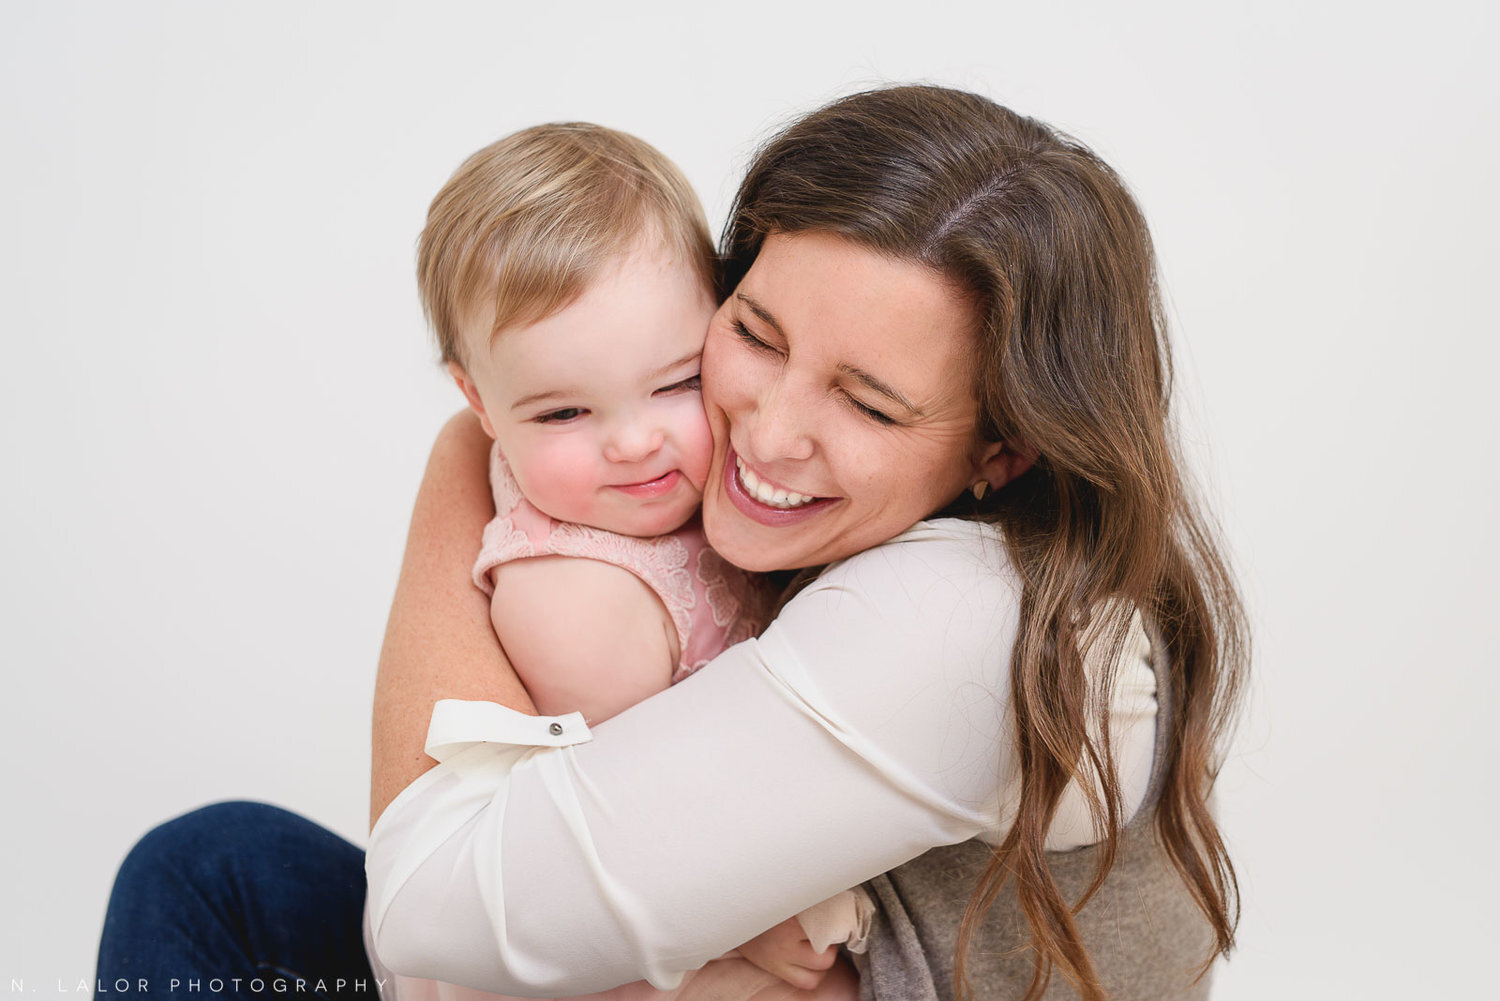 nlalor-photography-2016-12-20-mom-with-toddler-girl-greenwich-connecticut-9.jpg